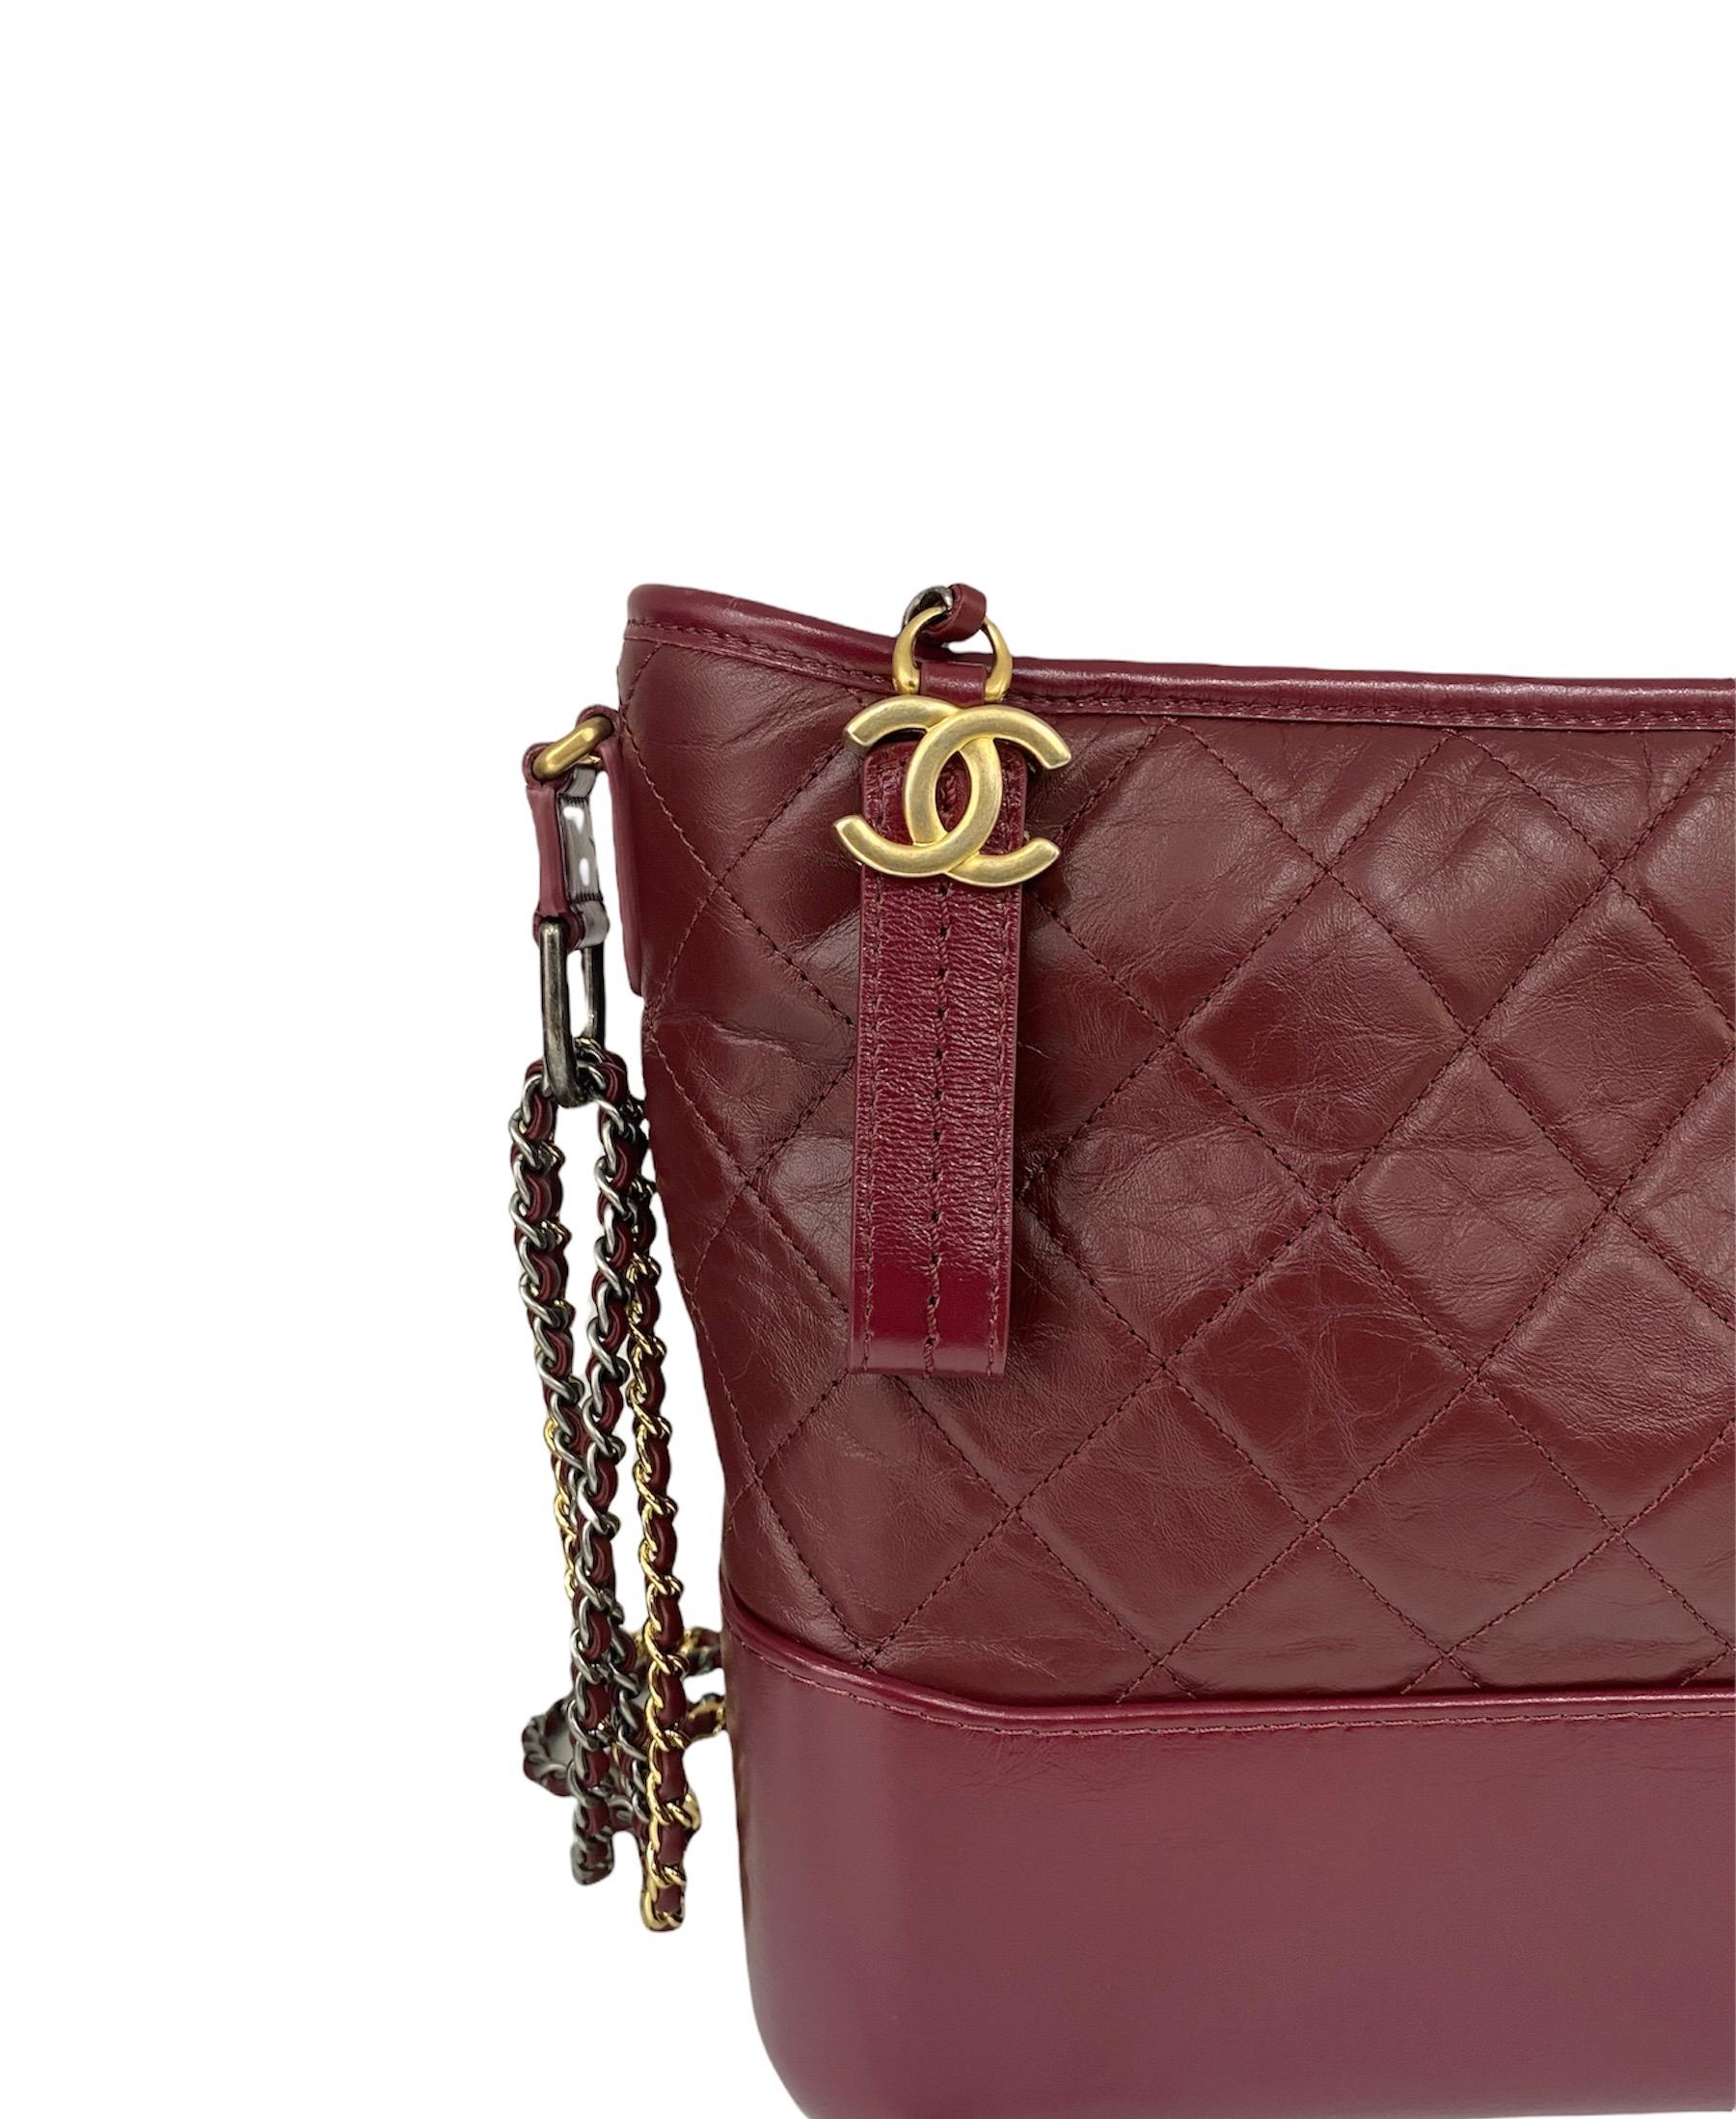 Fabulous bag by Chanel model Gabrielle made of burgundy leather with silver and gold hardware. The bag is equipped with a zip closure, with a roomy interior and equipped with pockets. The sliding shoulder strap is in leather and chain. The bag is in